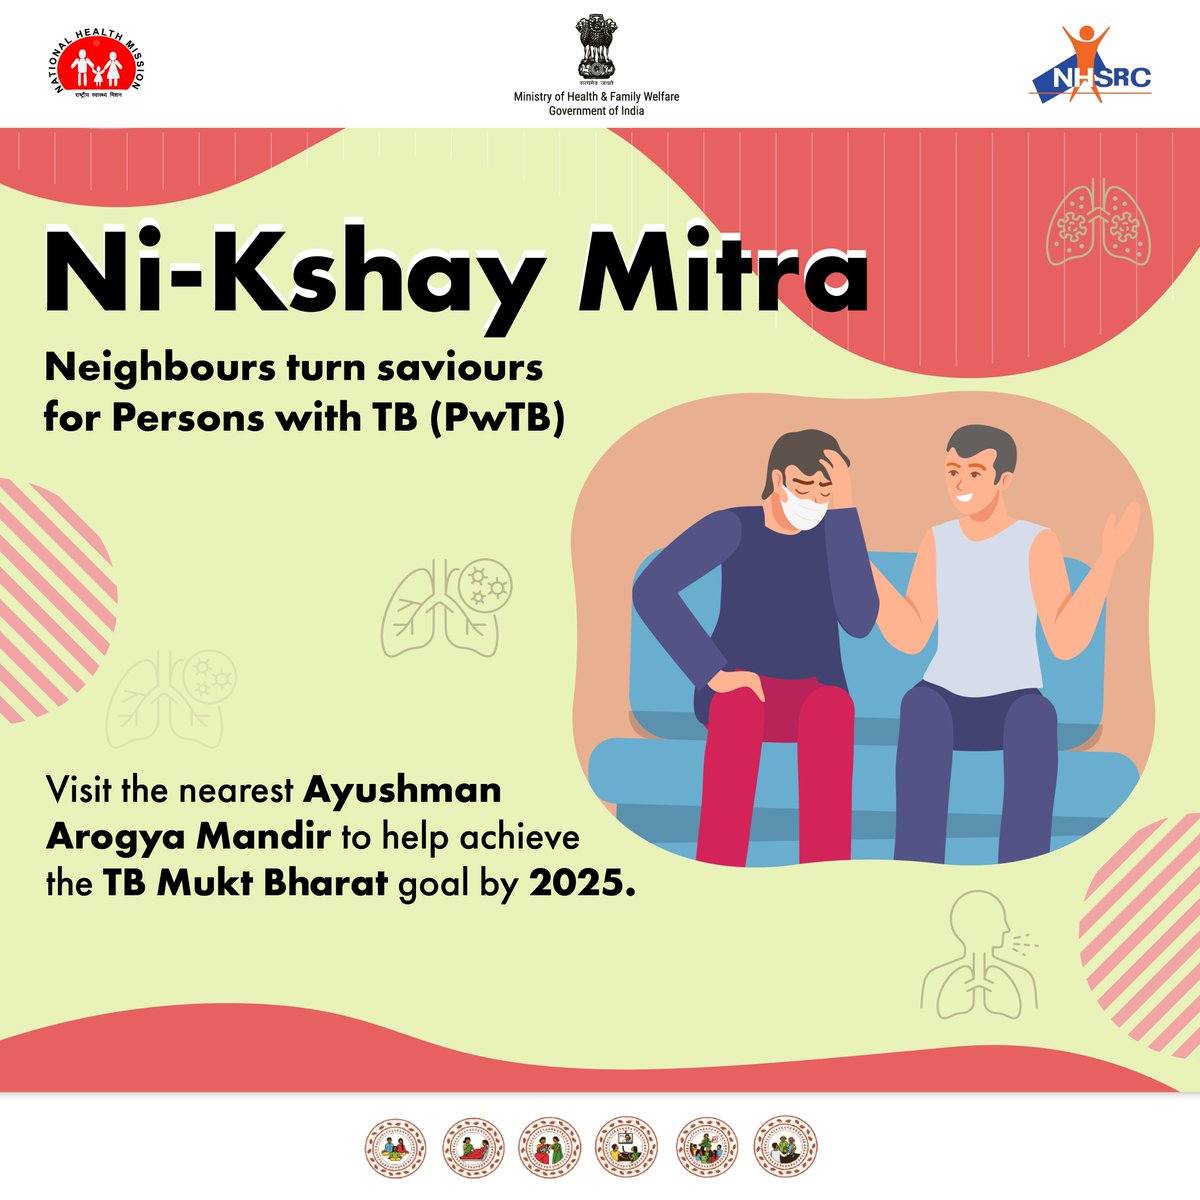 You can help strengthen the efforts under #PMTBMBA by providing nutritional, diagnostic, vocational, & social support to Persons with TB (PwTB).
Get yourself proudly registered as #NikshayMitras at the nearest #AyushmanArogyaMandir and help #EndTB by 2025. 💪
#TBMuktBharat